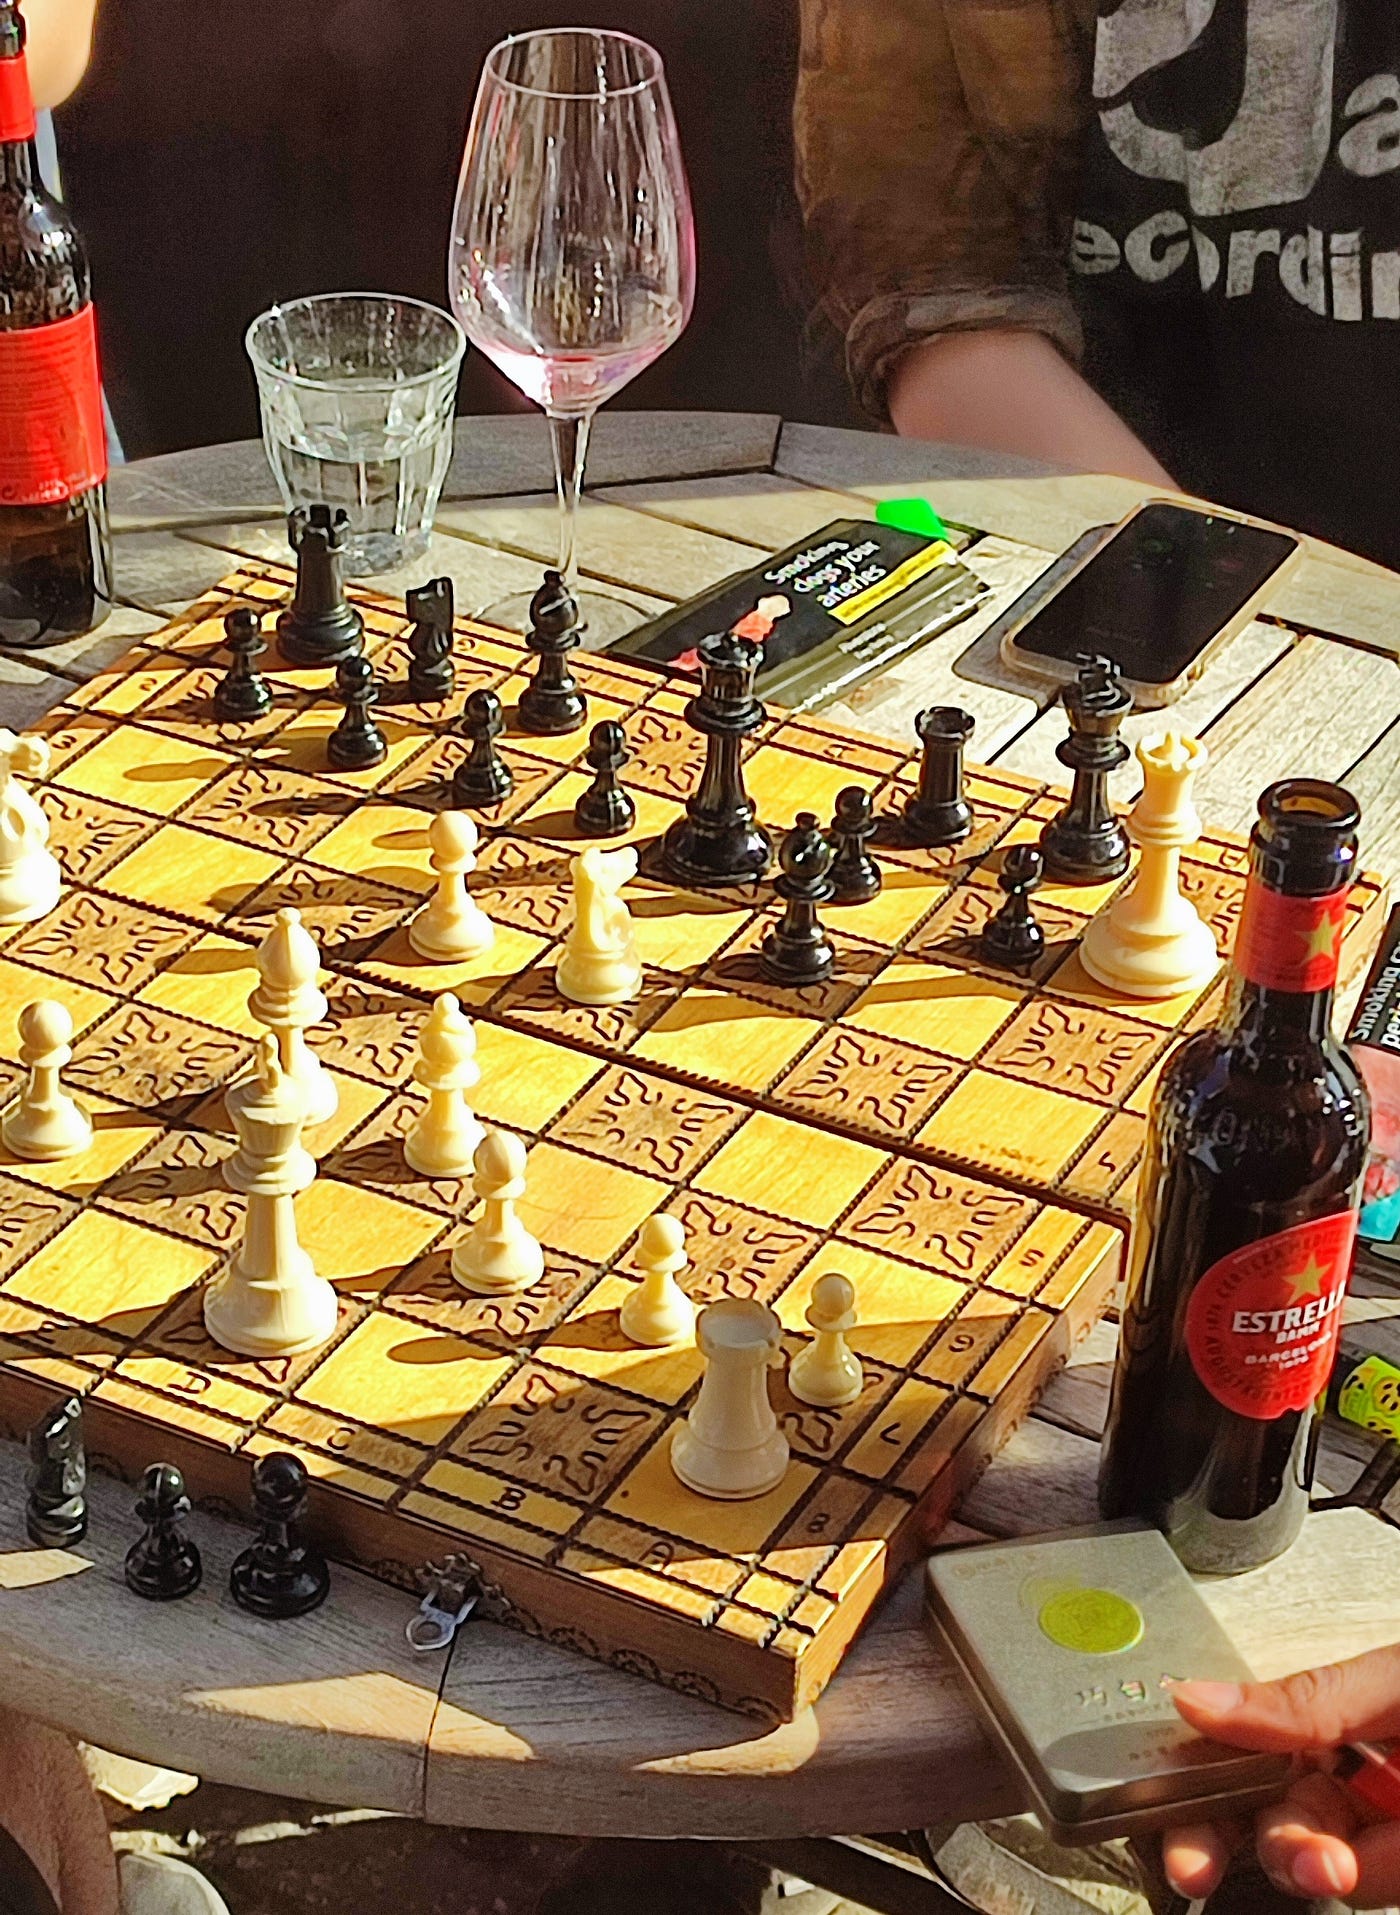 Chess and coffee